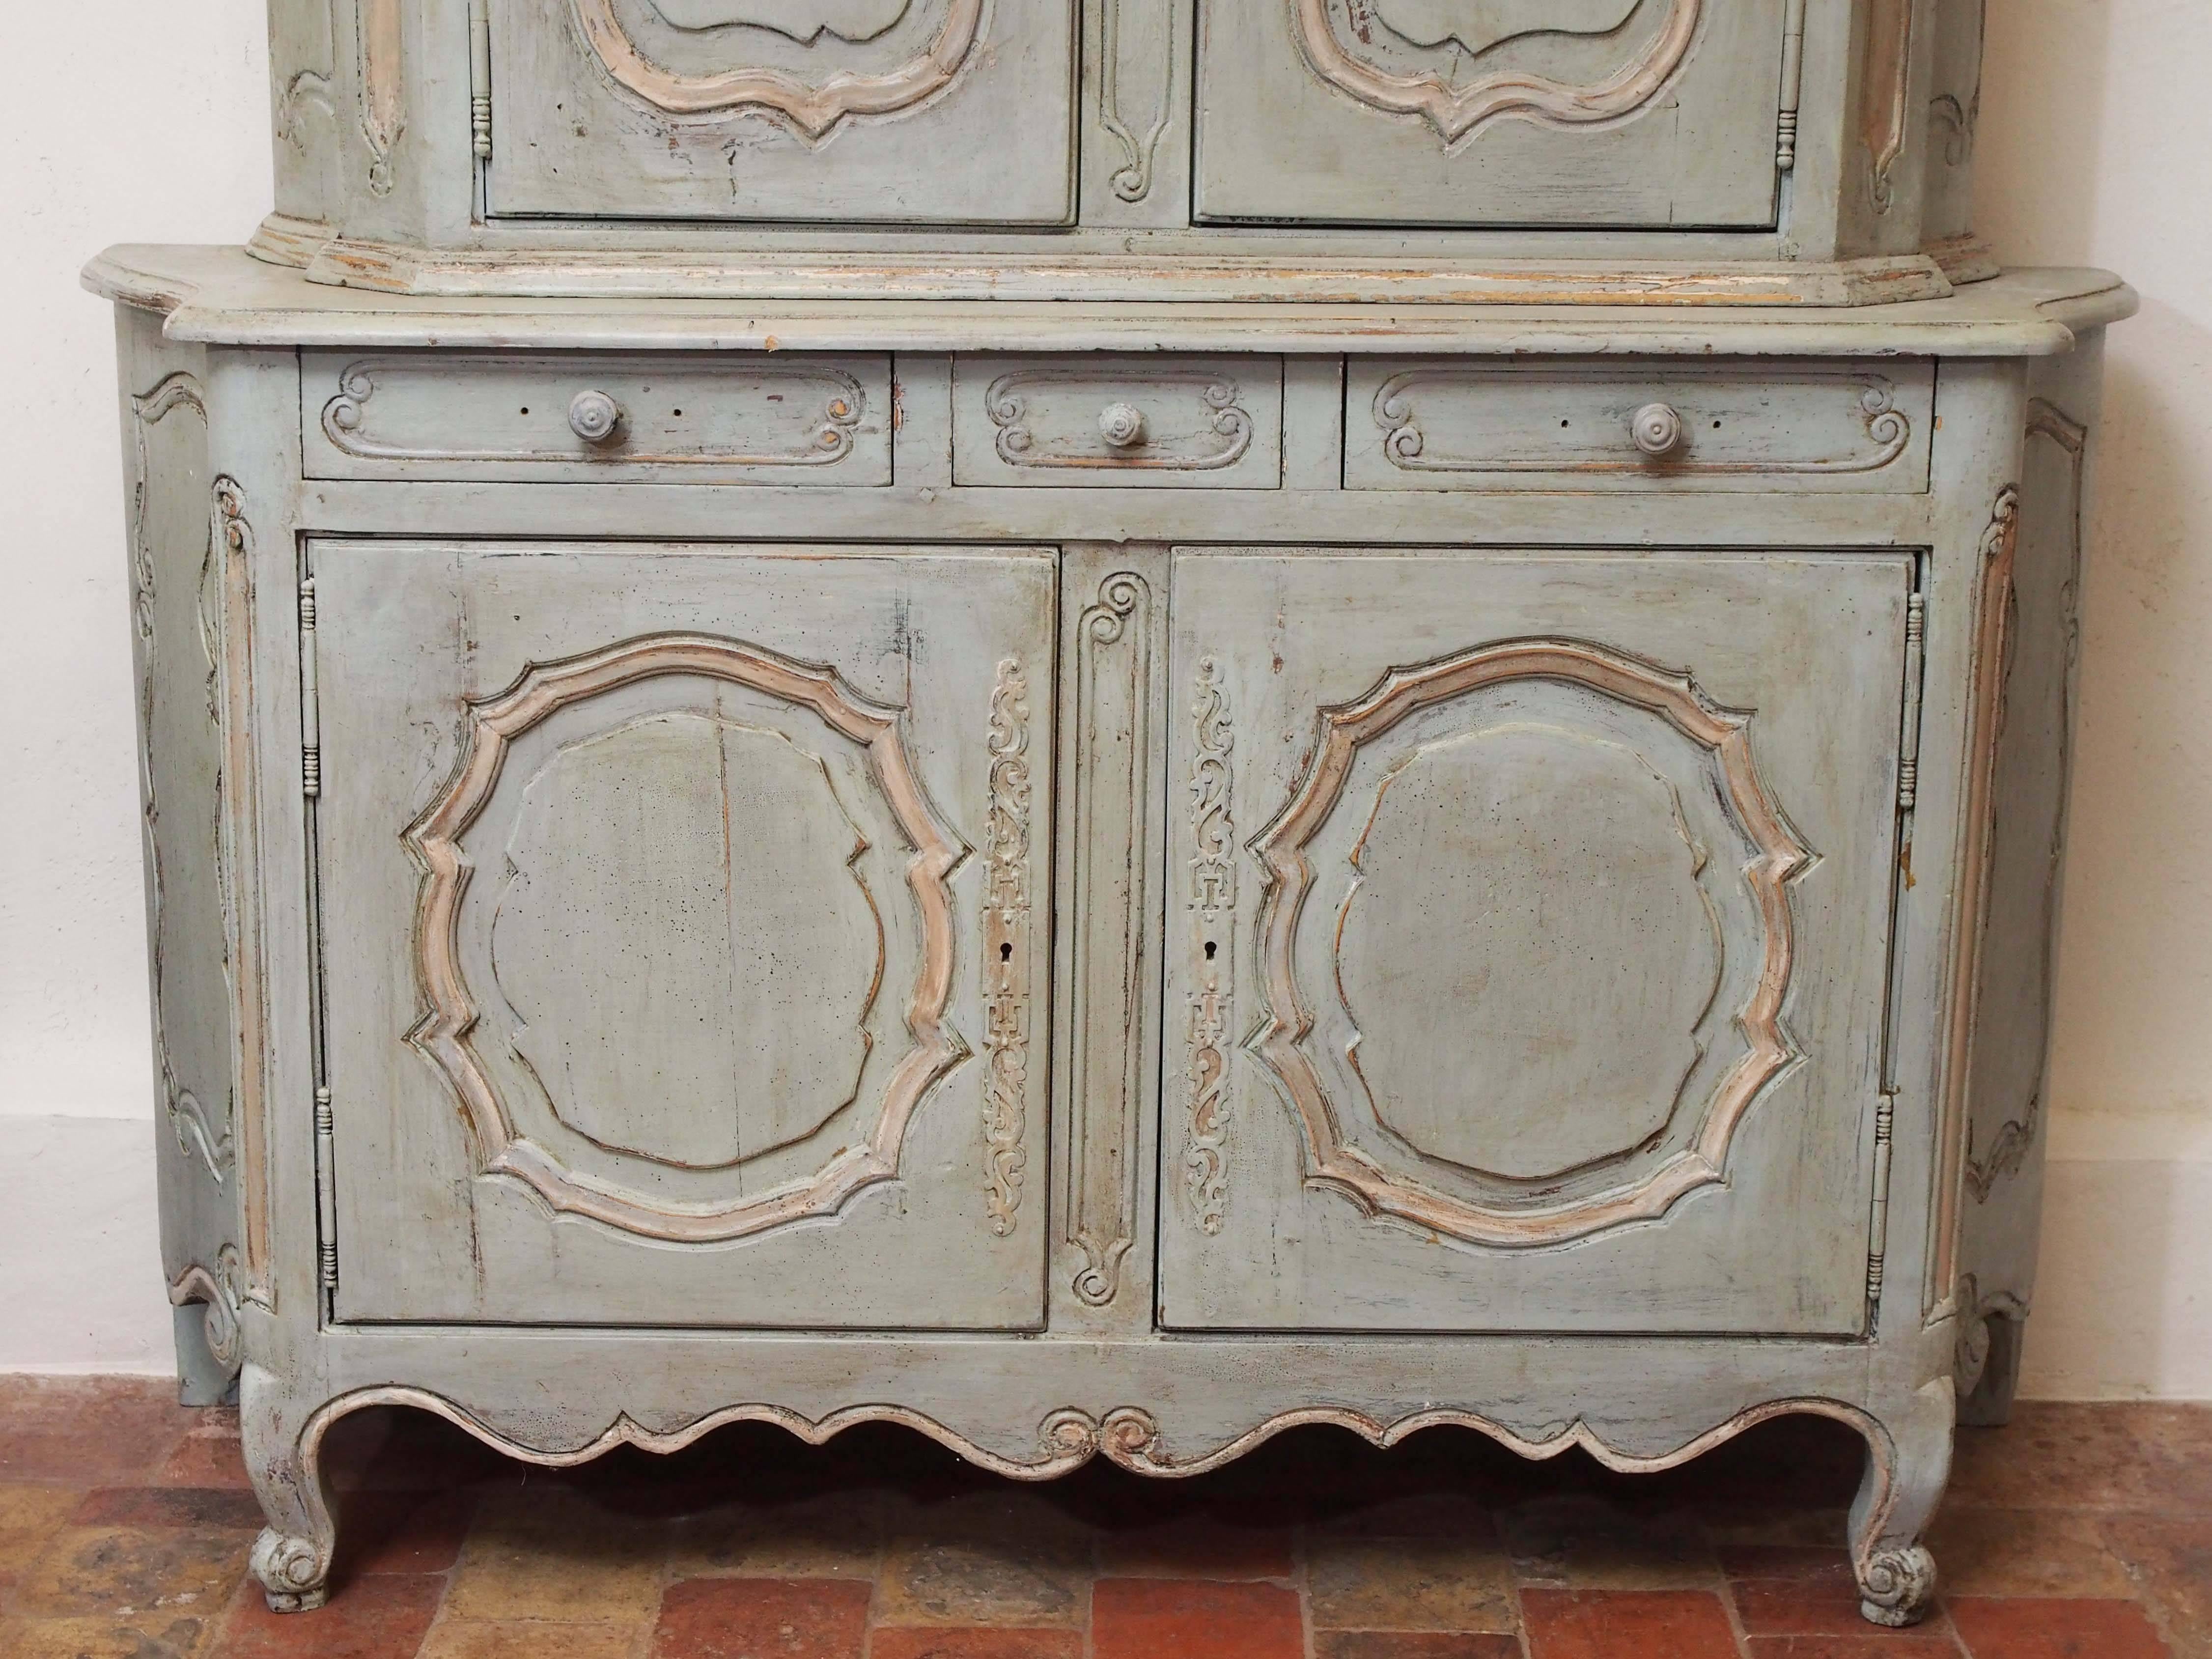 19th Century French Painted Buffet a Deux Corps In Excellent Condition For Sale In New Orleans, LA